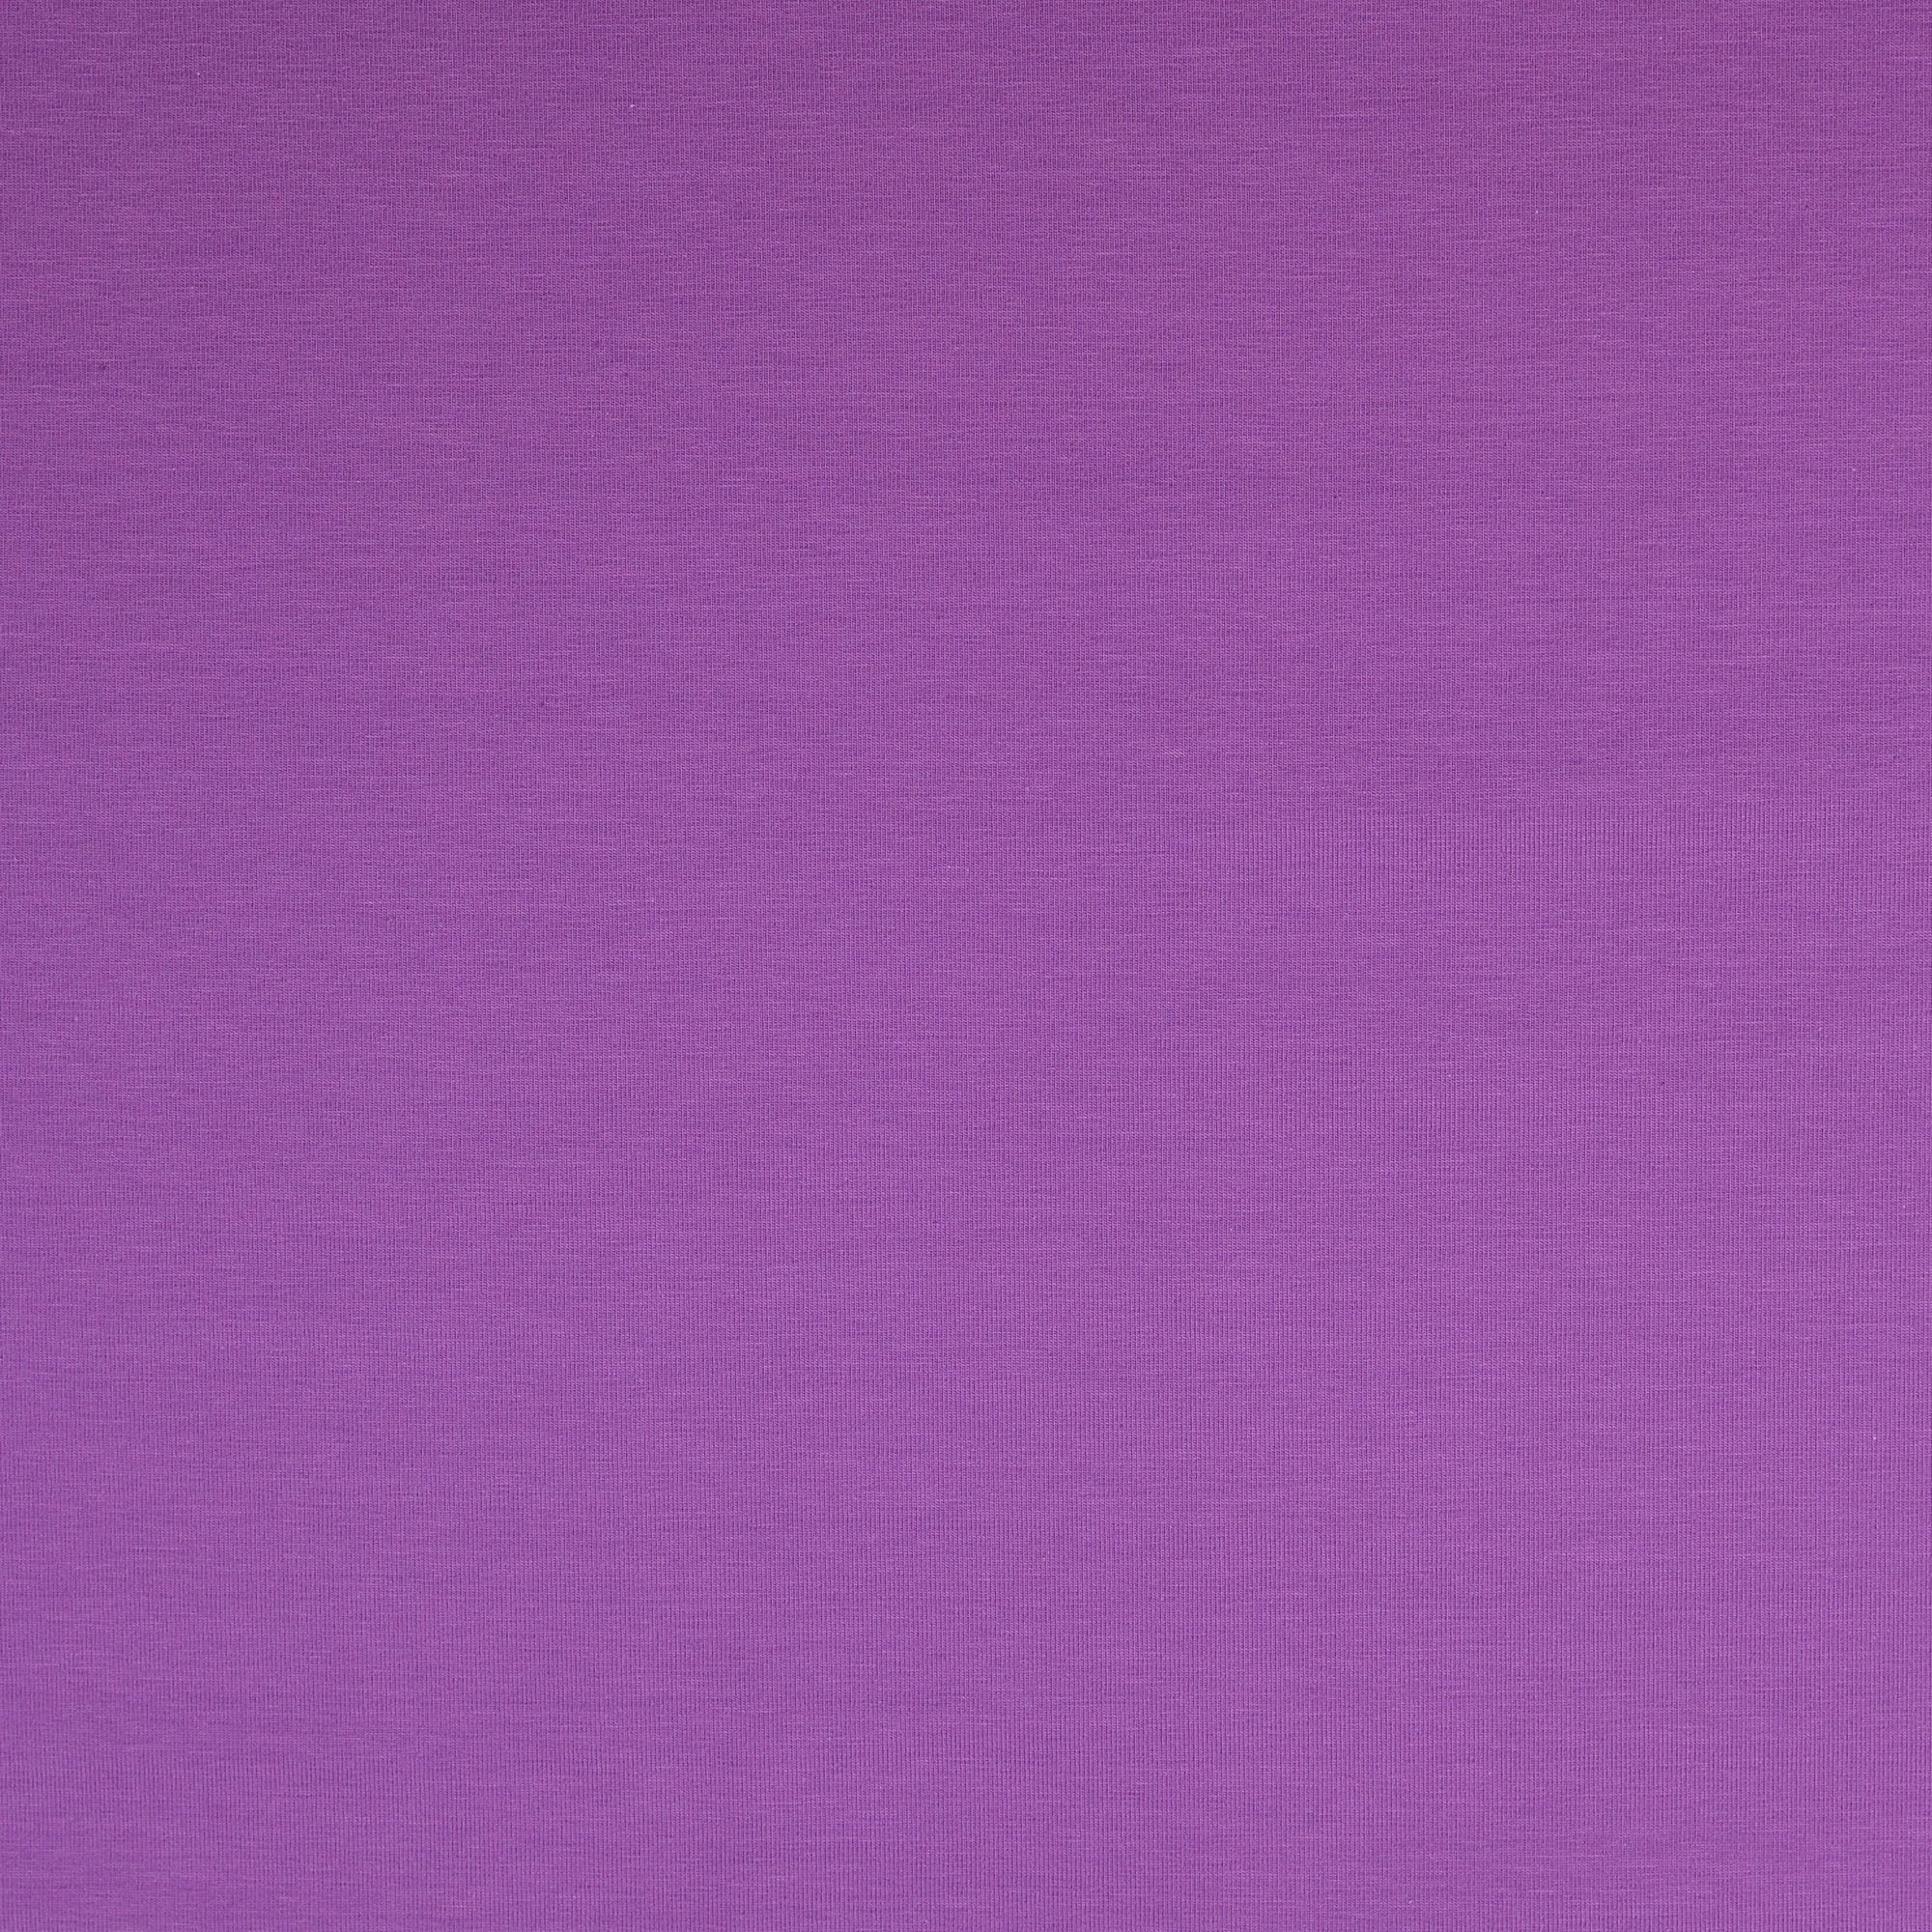 REMNANT 0.25 Metre - Essential Chic Lavender Cotton Jersey Fabric